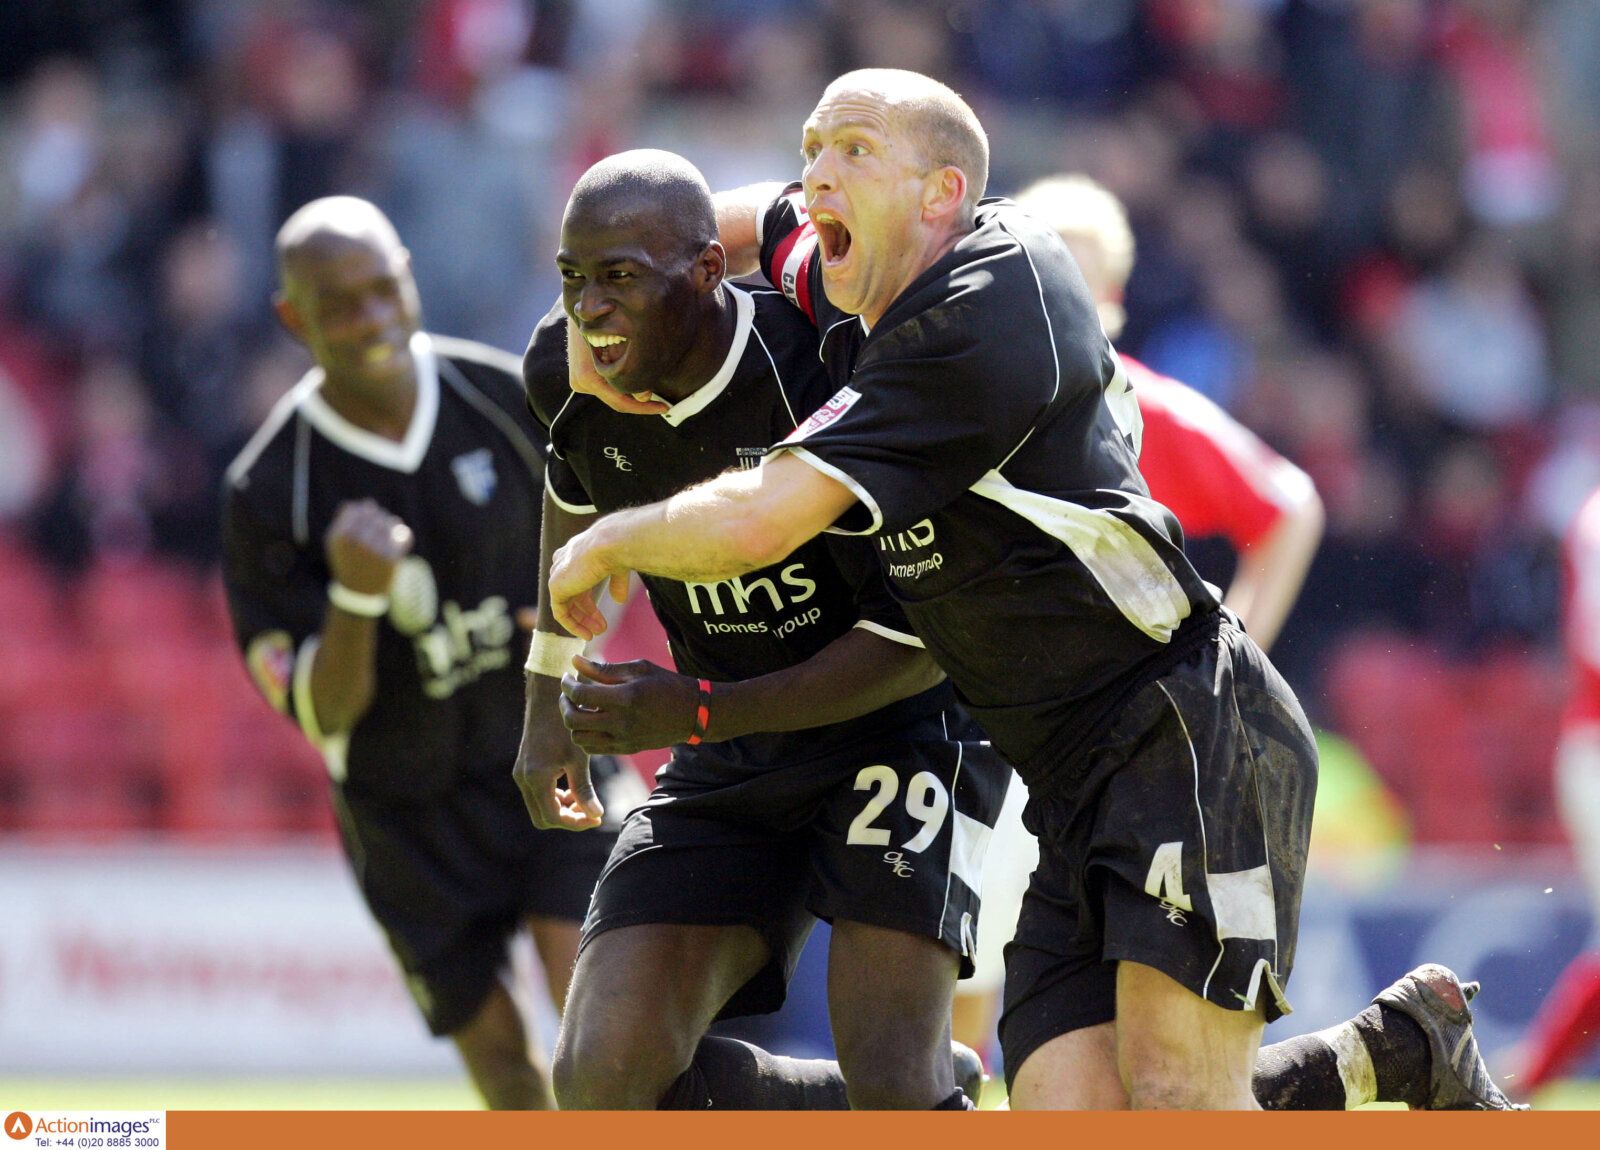 Football - Nottingham Forest v Gillingham Coca-Cola Football League Championship - The City Ground - 8/5/05 
Gillingham's Mamady Sidibe celebrates scoring the second goal with Paul Smith 
Mandatory Credit: Action Images / Michael Regan 
Livepic